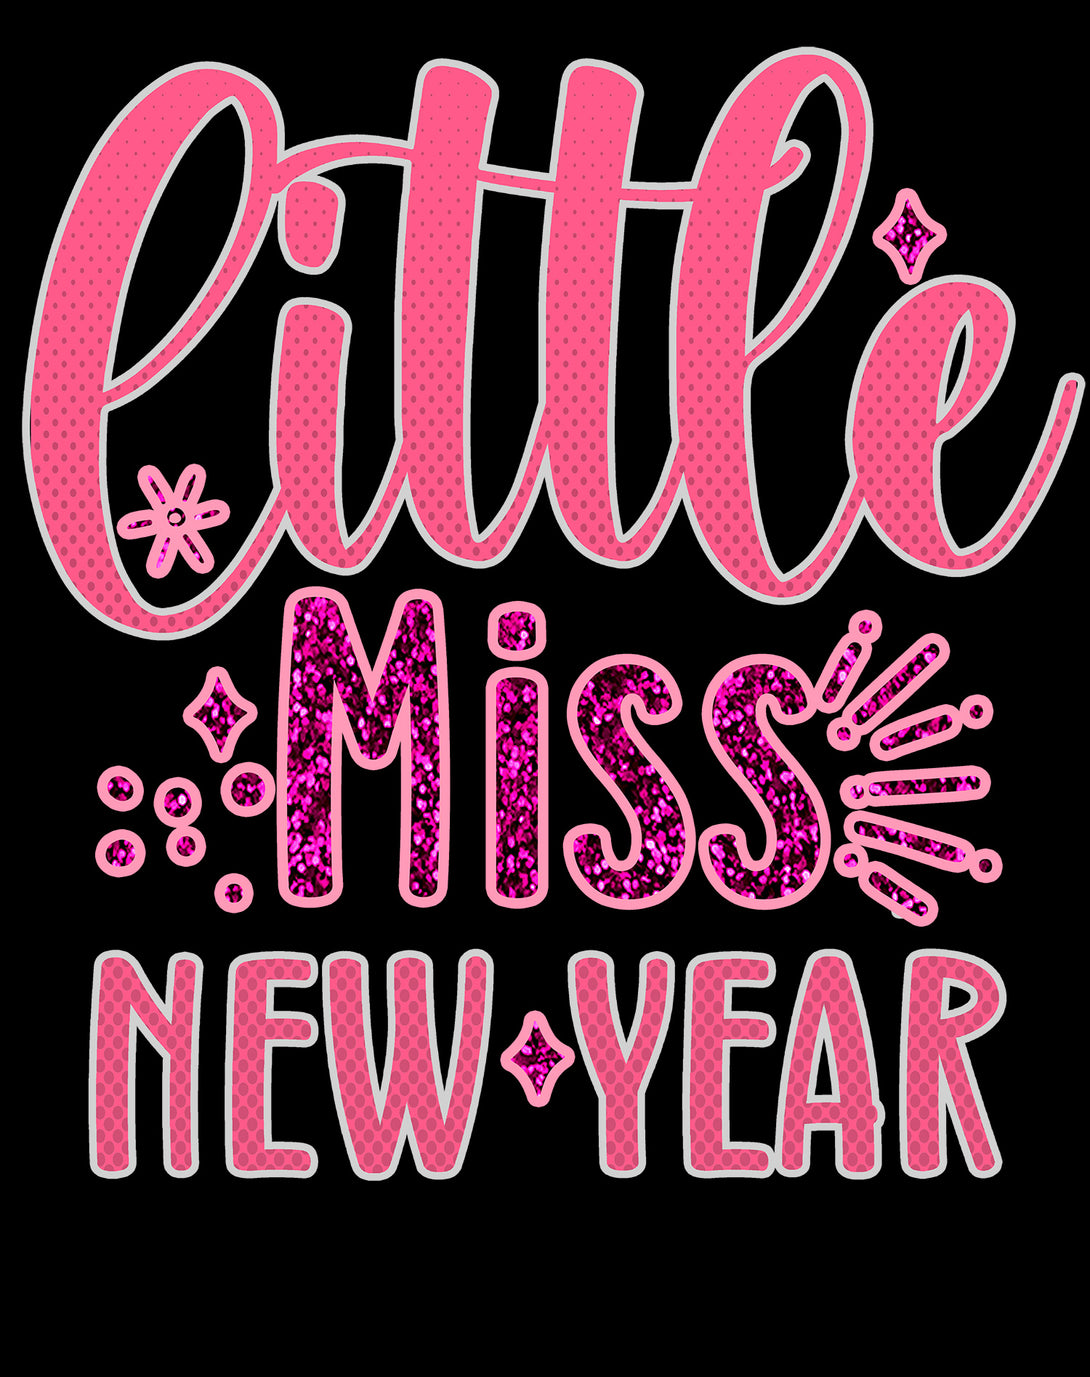 NYE Little Miss New Year Sparkle Bling Party Eve Celebration Women's T-Shirt Black - Urban Species Design Close Up